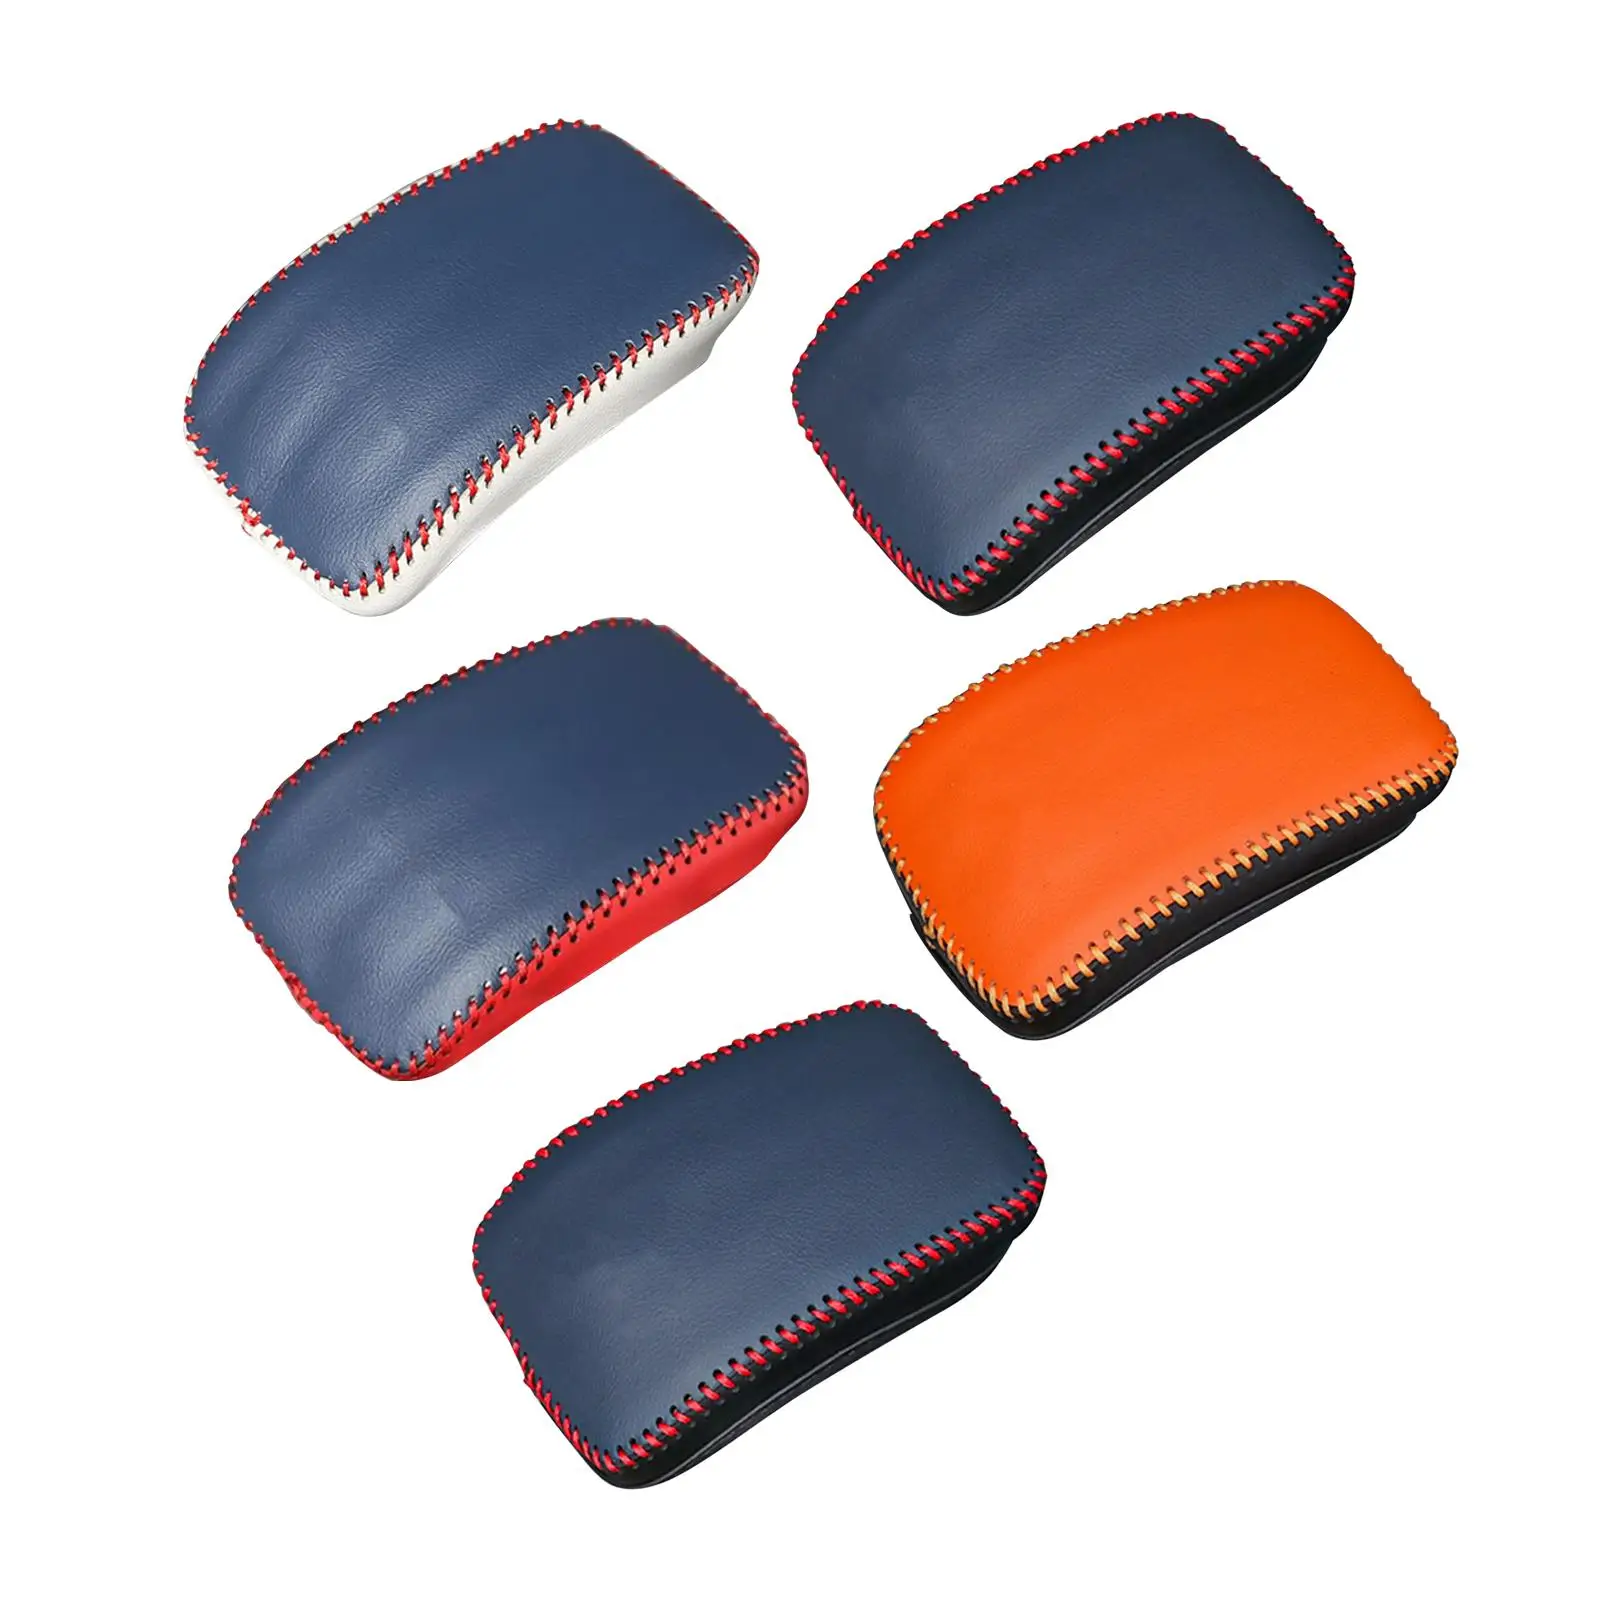 1x Auto Door Handle Protective Cover for Byd Yuan Plus Accessories Scratch Resistant